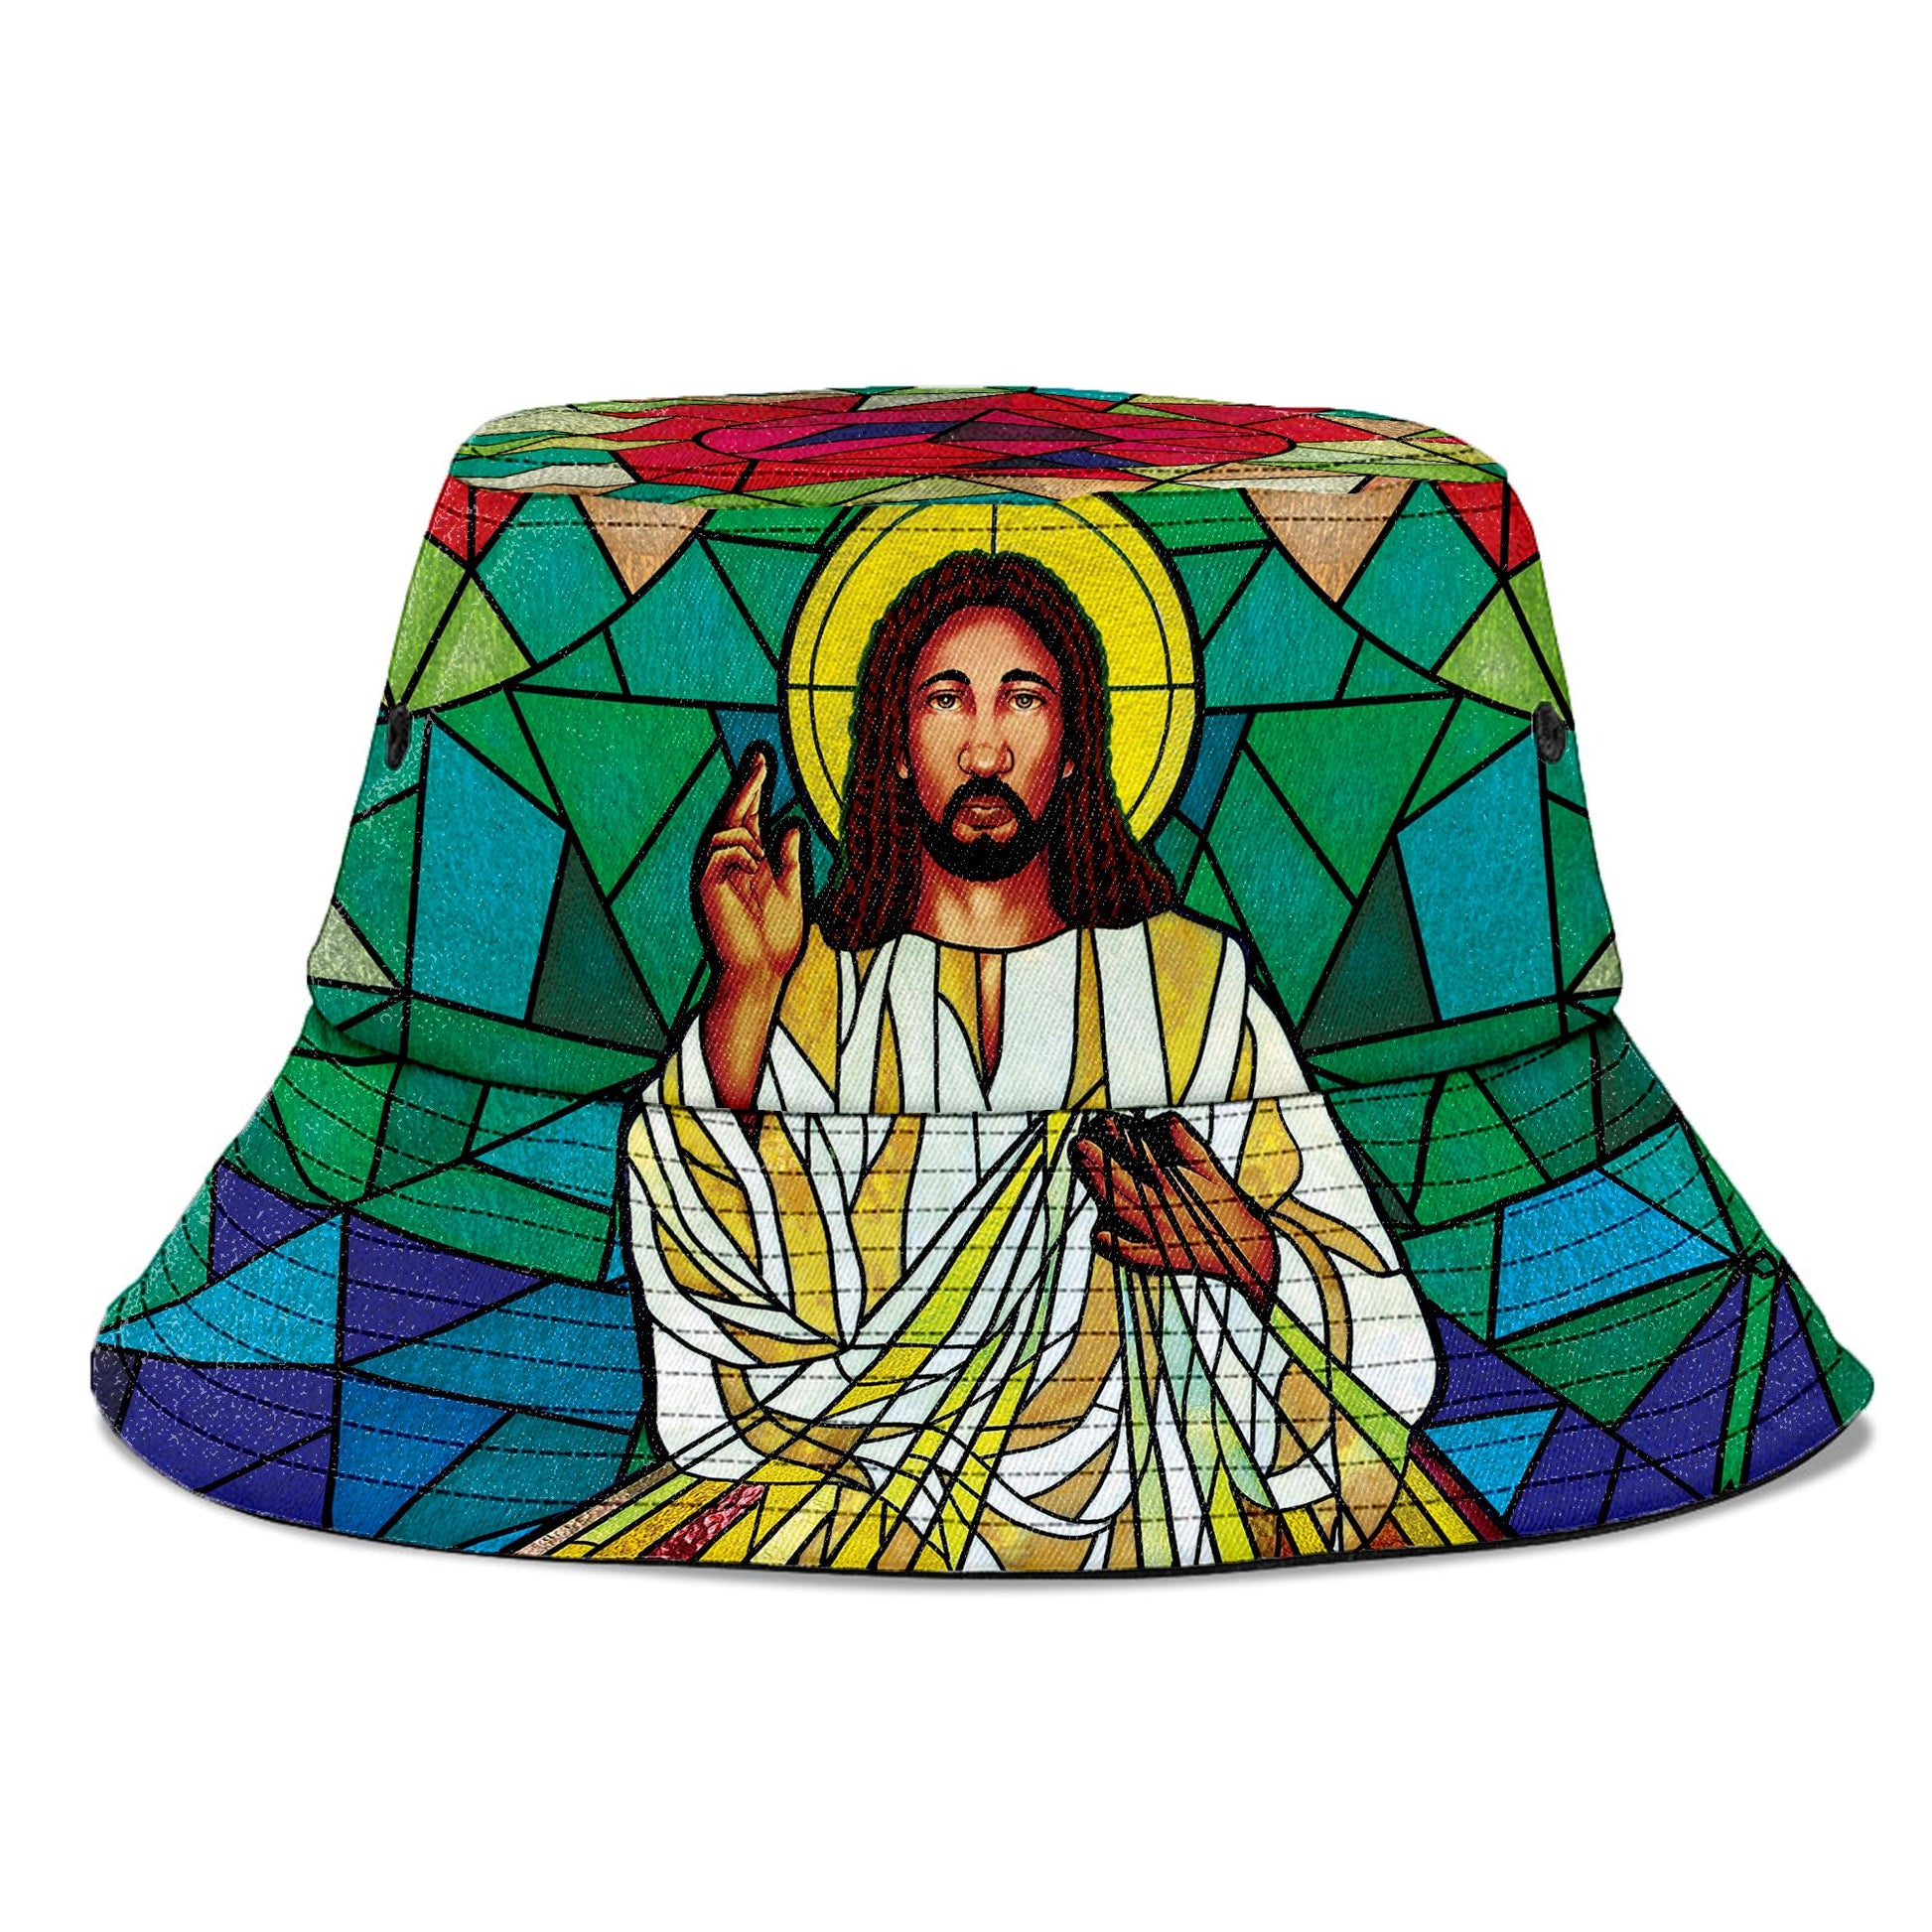 Black Jesus On The Stained Glass Bucket Hat Bucket Hat Tianci 